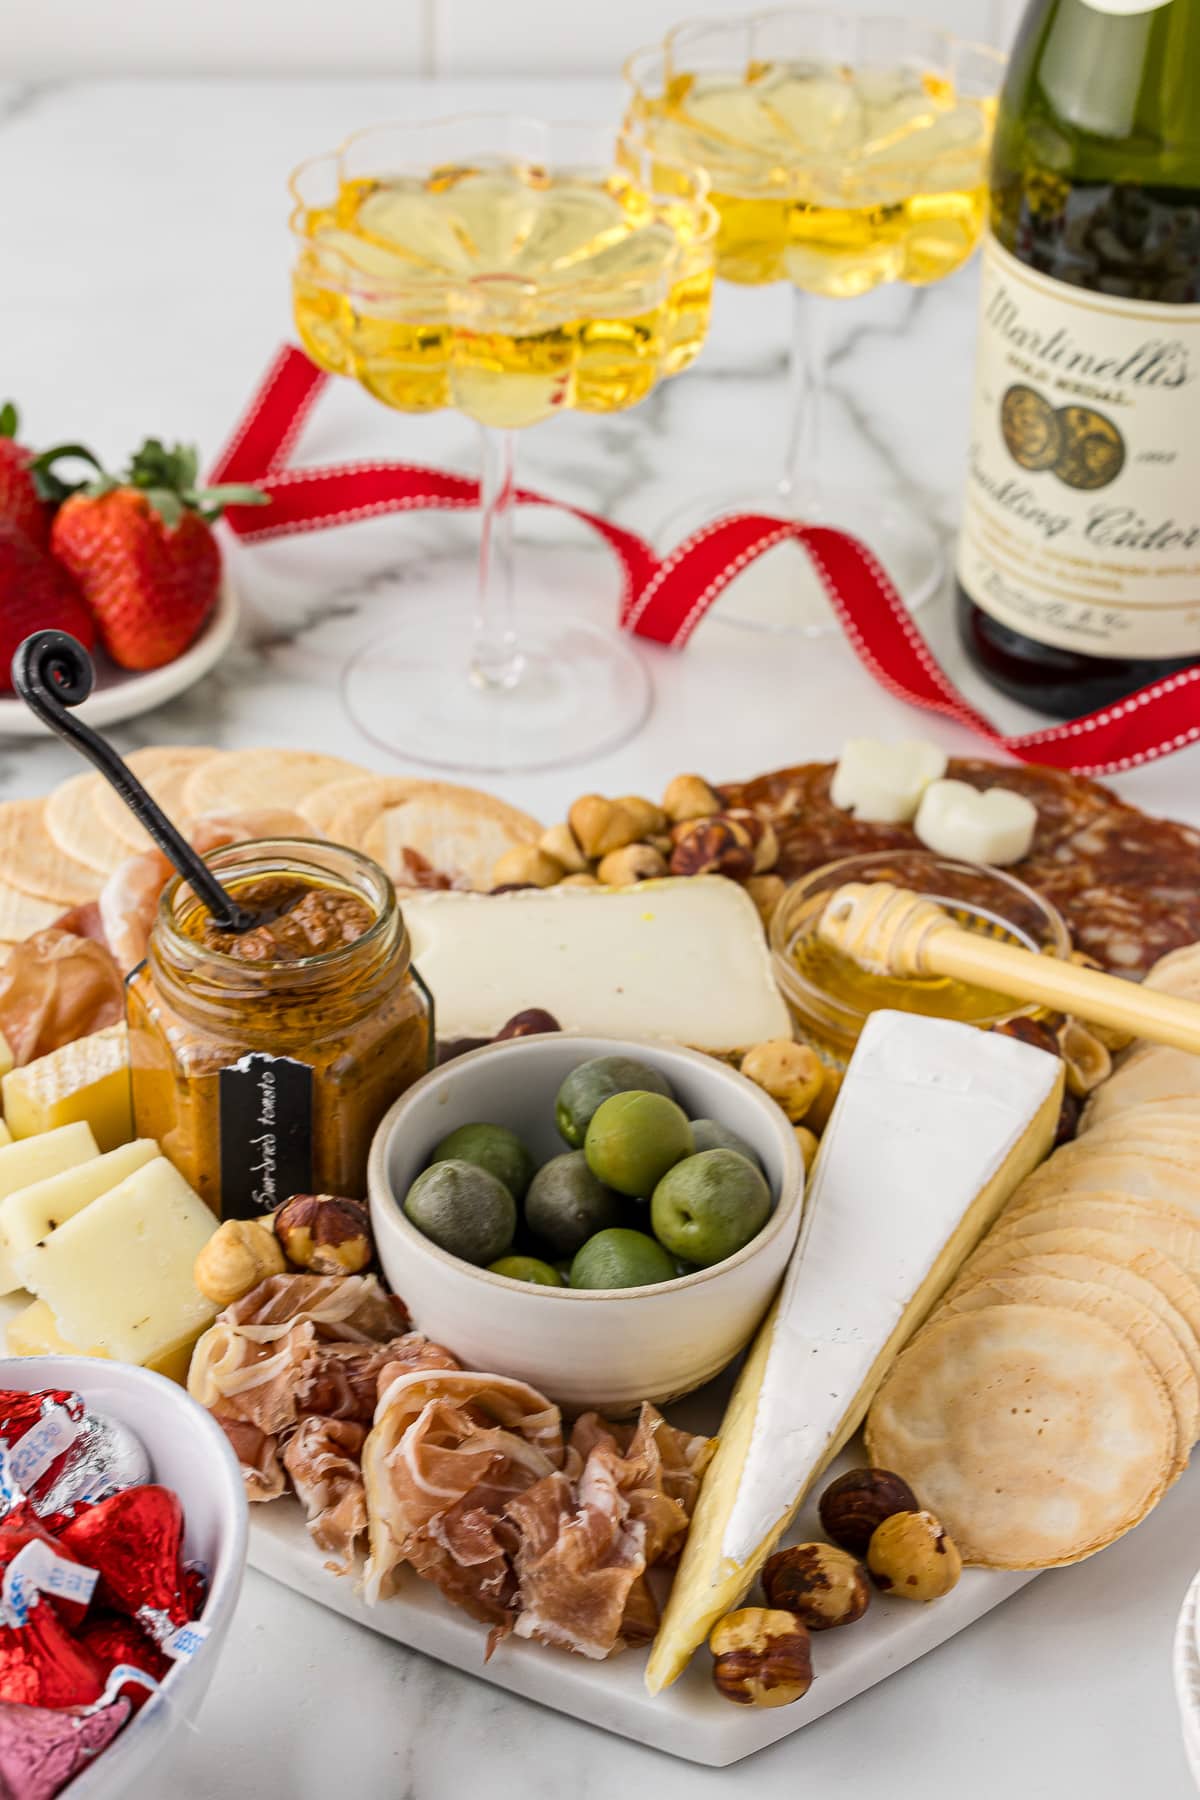 Olives, cheeses, meats and crackers on an appetizer tray for a party